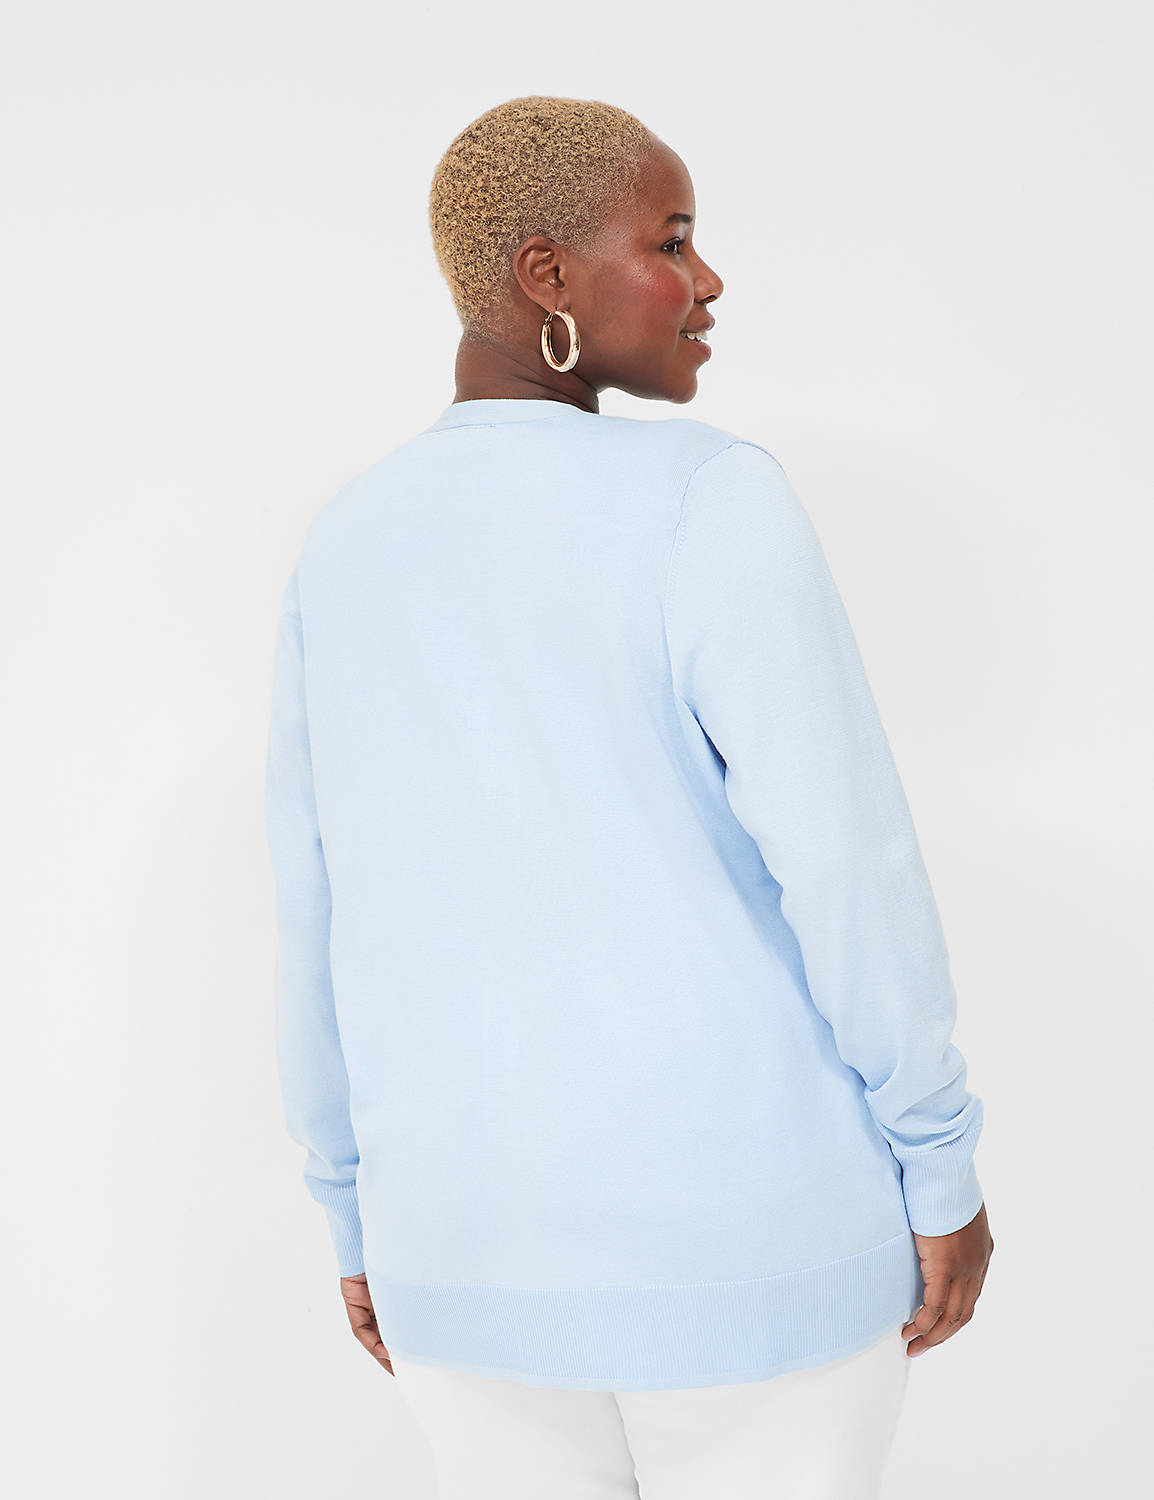 Classic Long Sleeve Open Front Mode Product Image 2